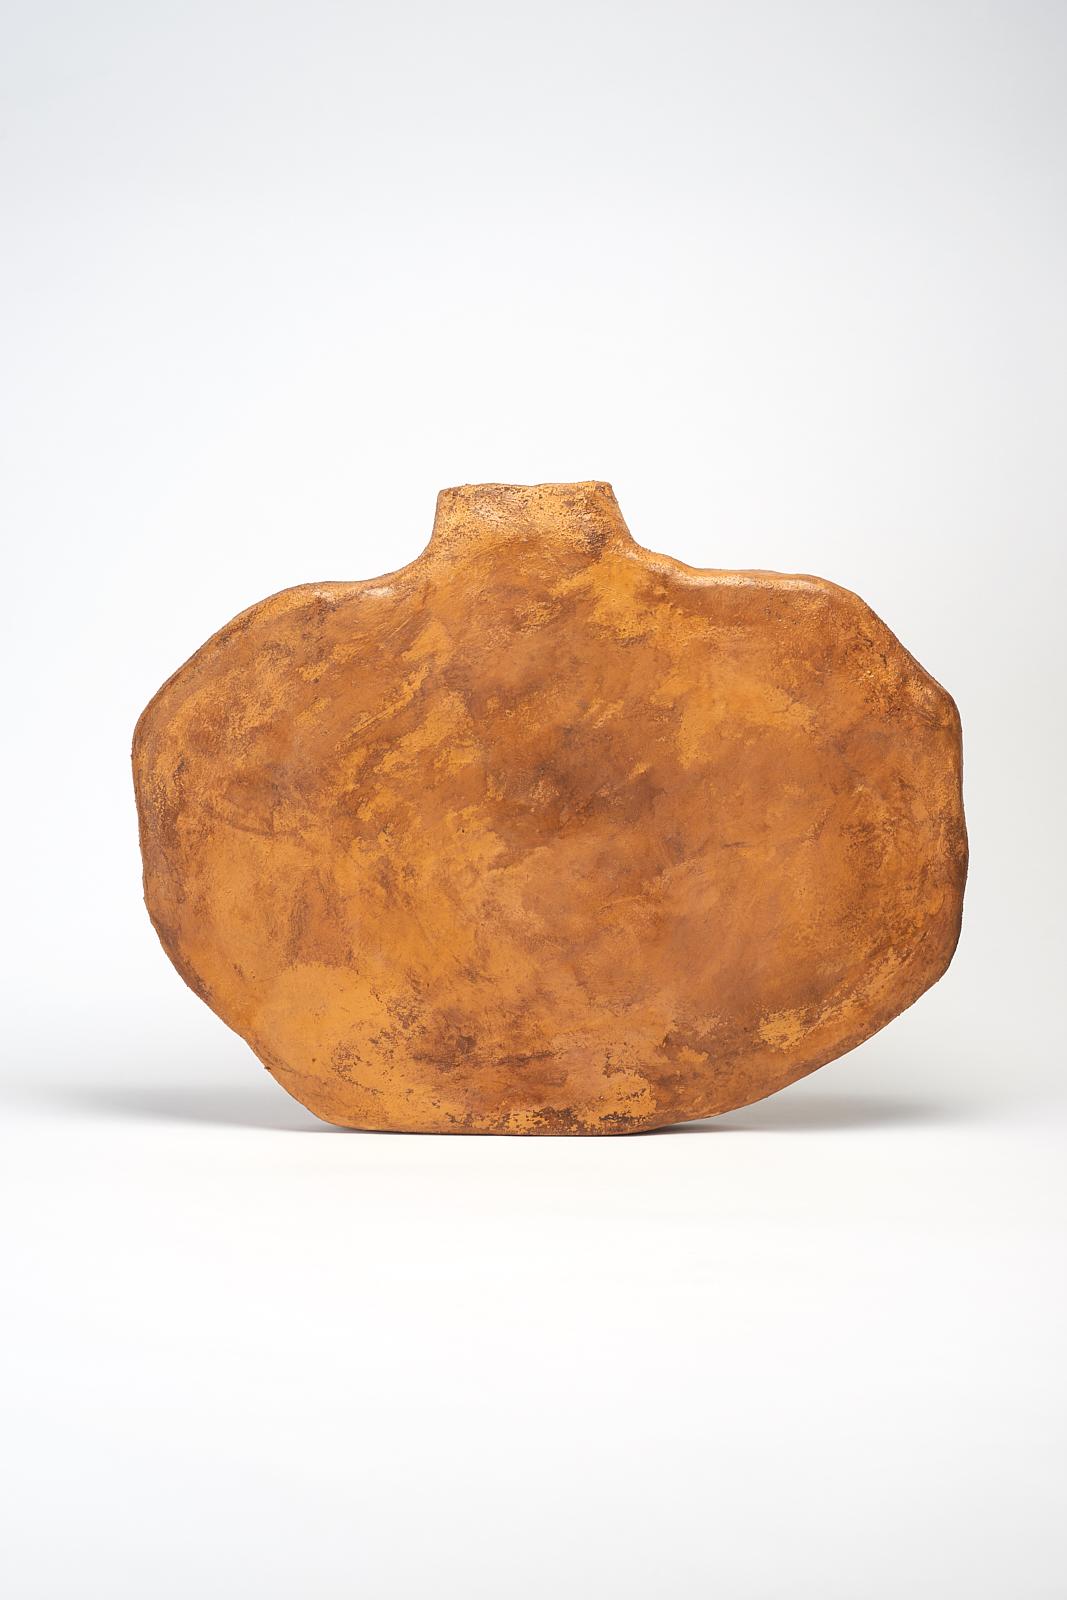 Farik vase by Willem Van hooff
Core Vessel Series
Dimensions: W 50 x H 42 cm (Dimensions may vary as pieces are hand-made and might present slight variations in sizes)
Materials: Earthenware, ceramic, pigments, glaze

Core is a series of flat